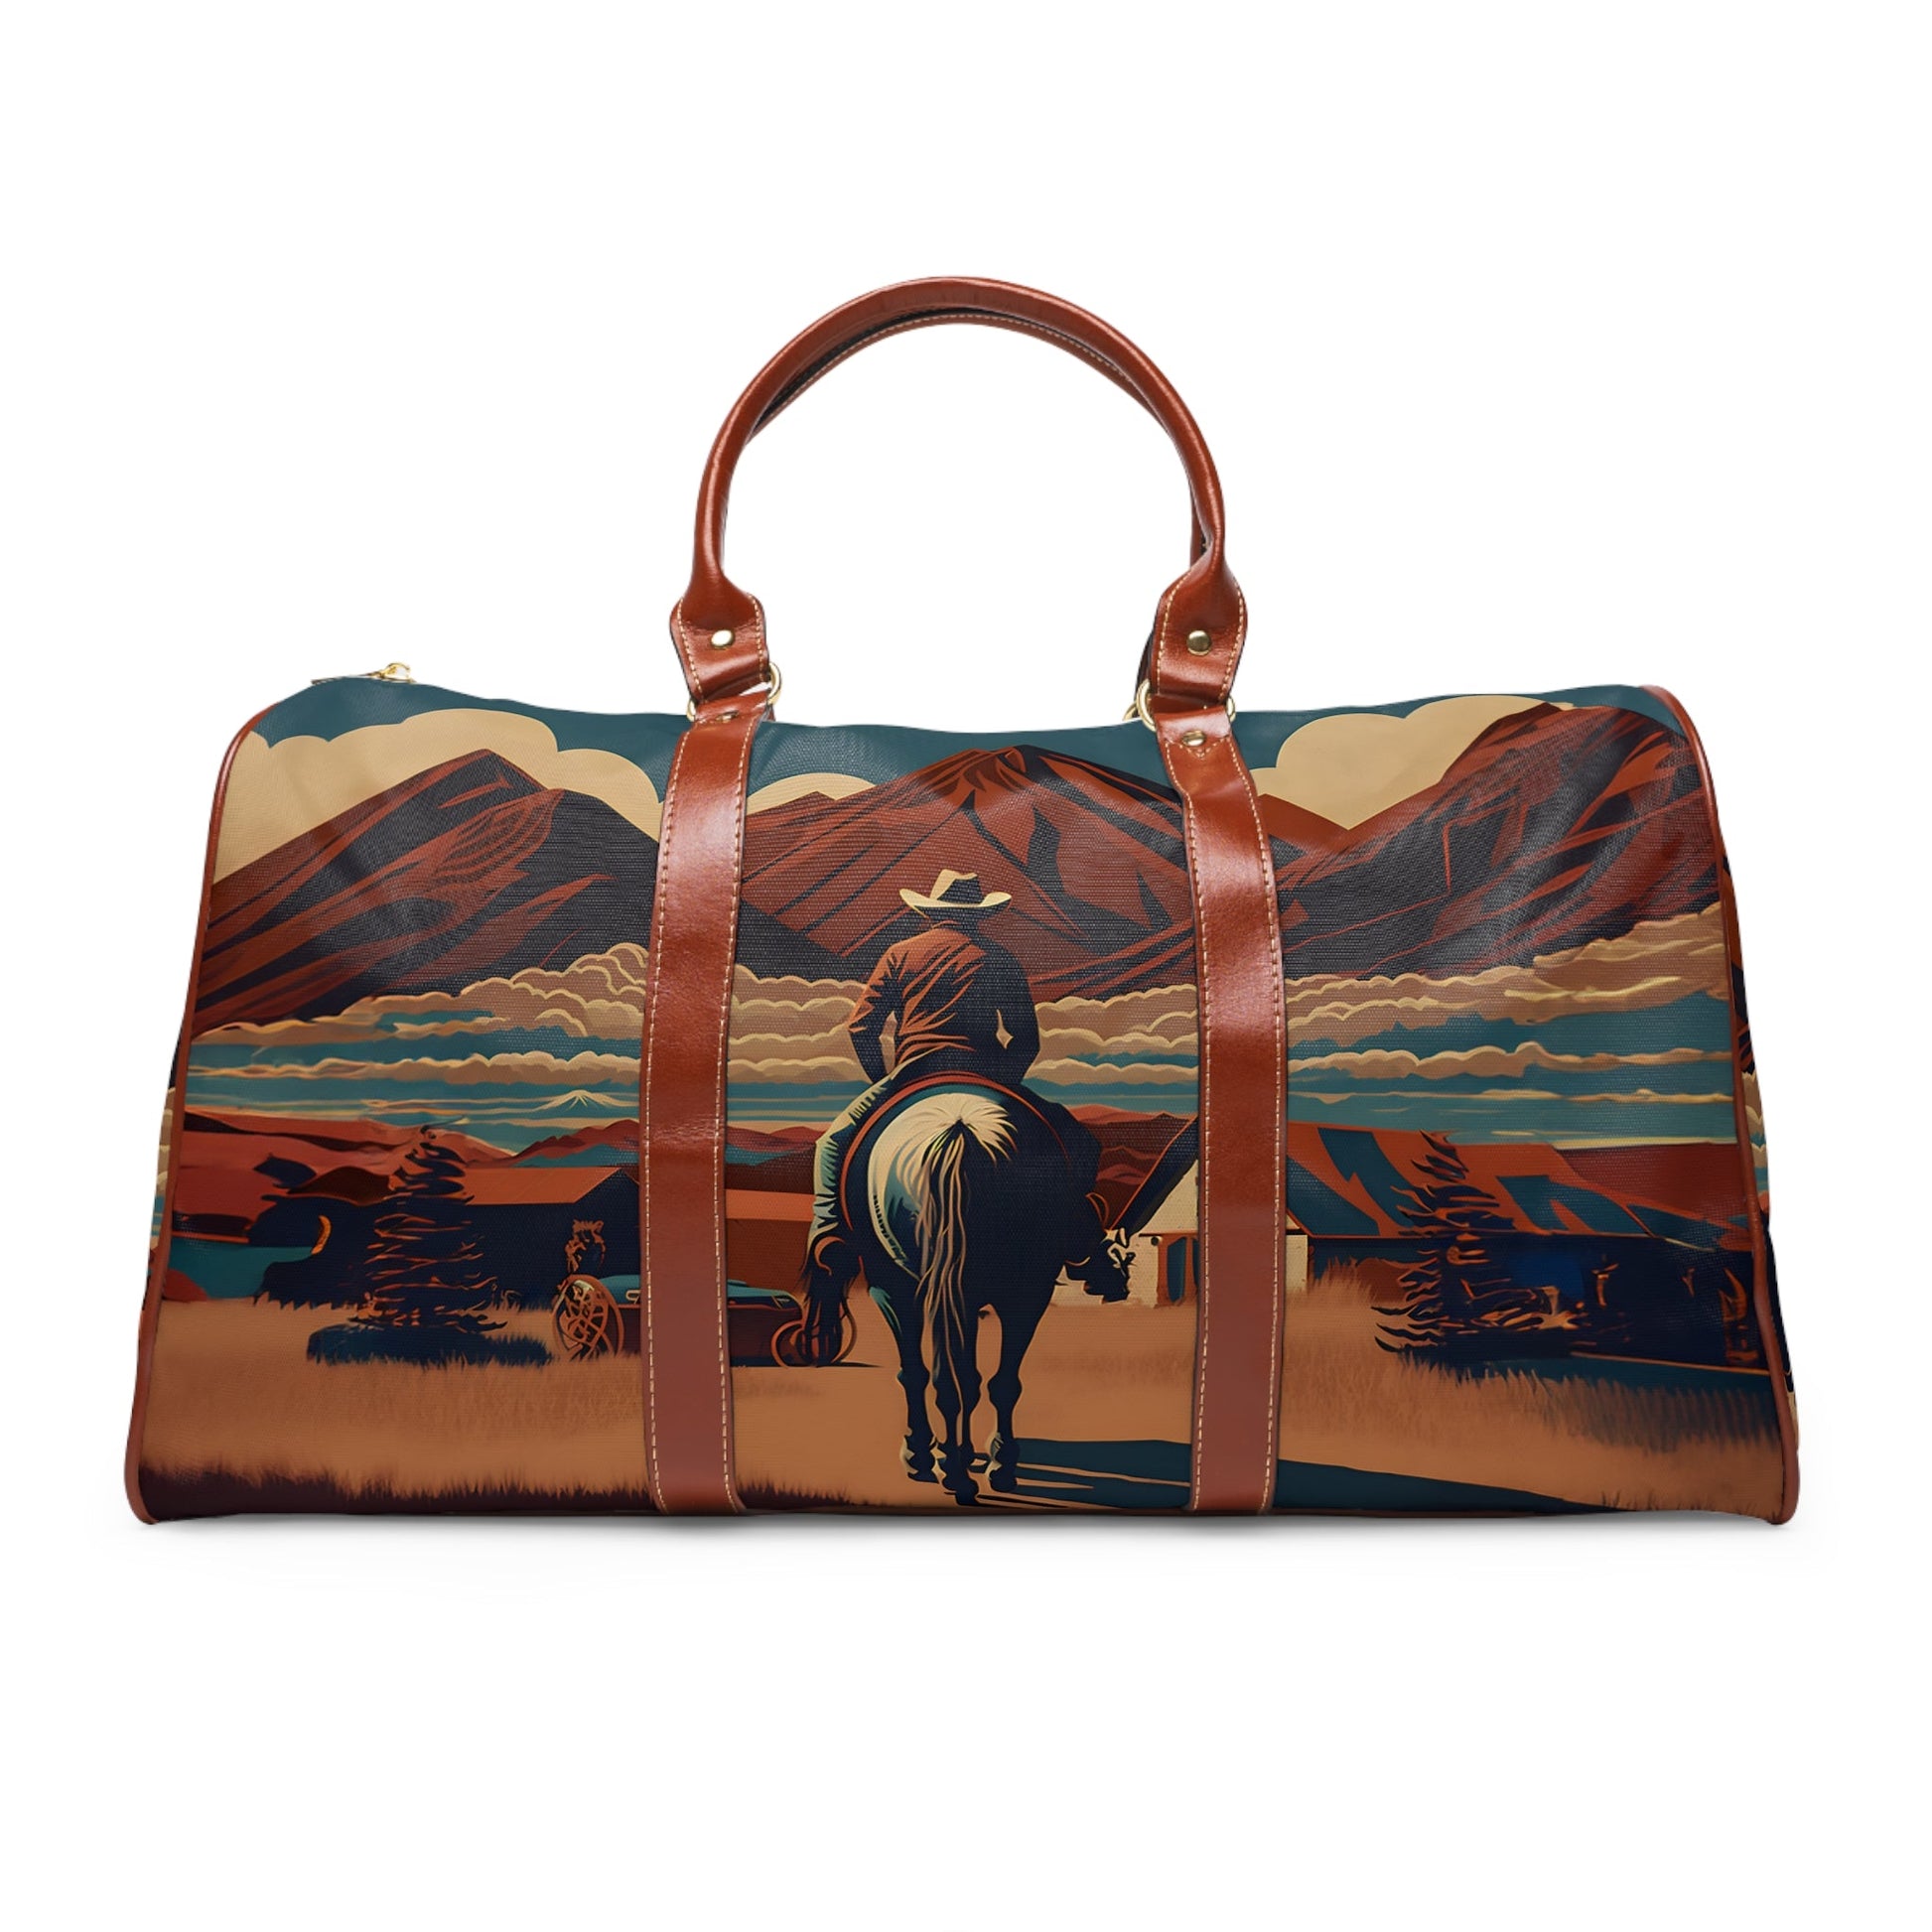 Vintage Cowboy Art Travel Bag - Bigger than most duffle bags, tote bags and even most weekender bags!